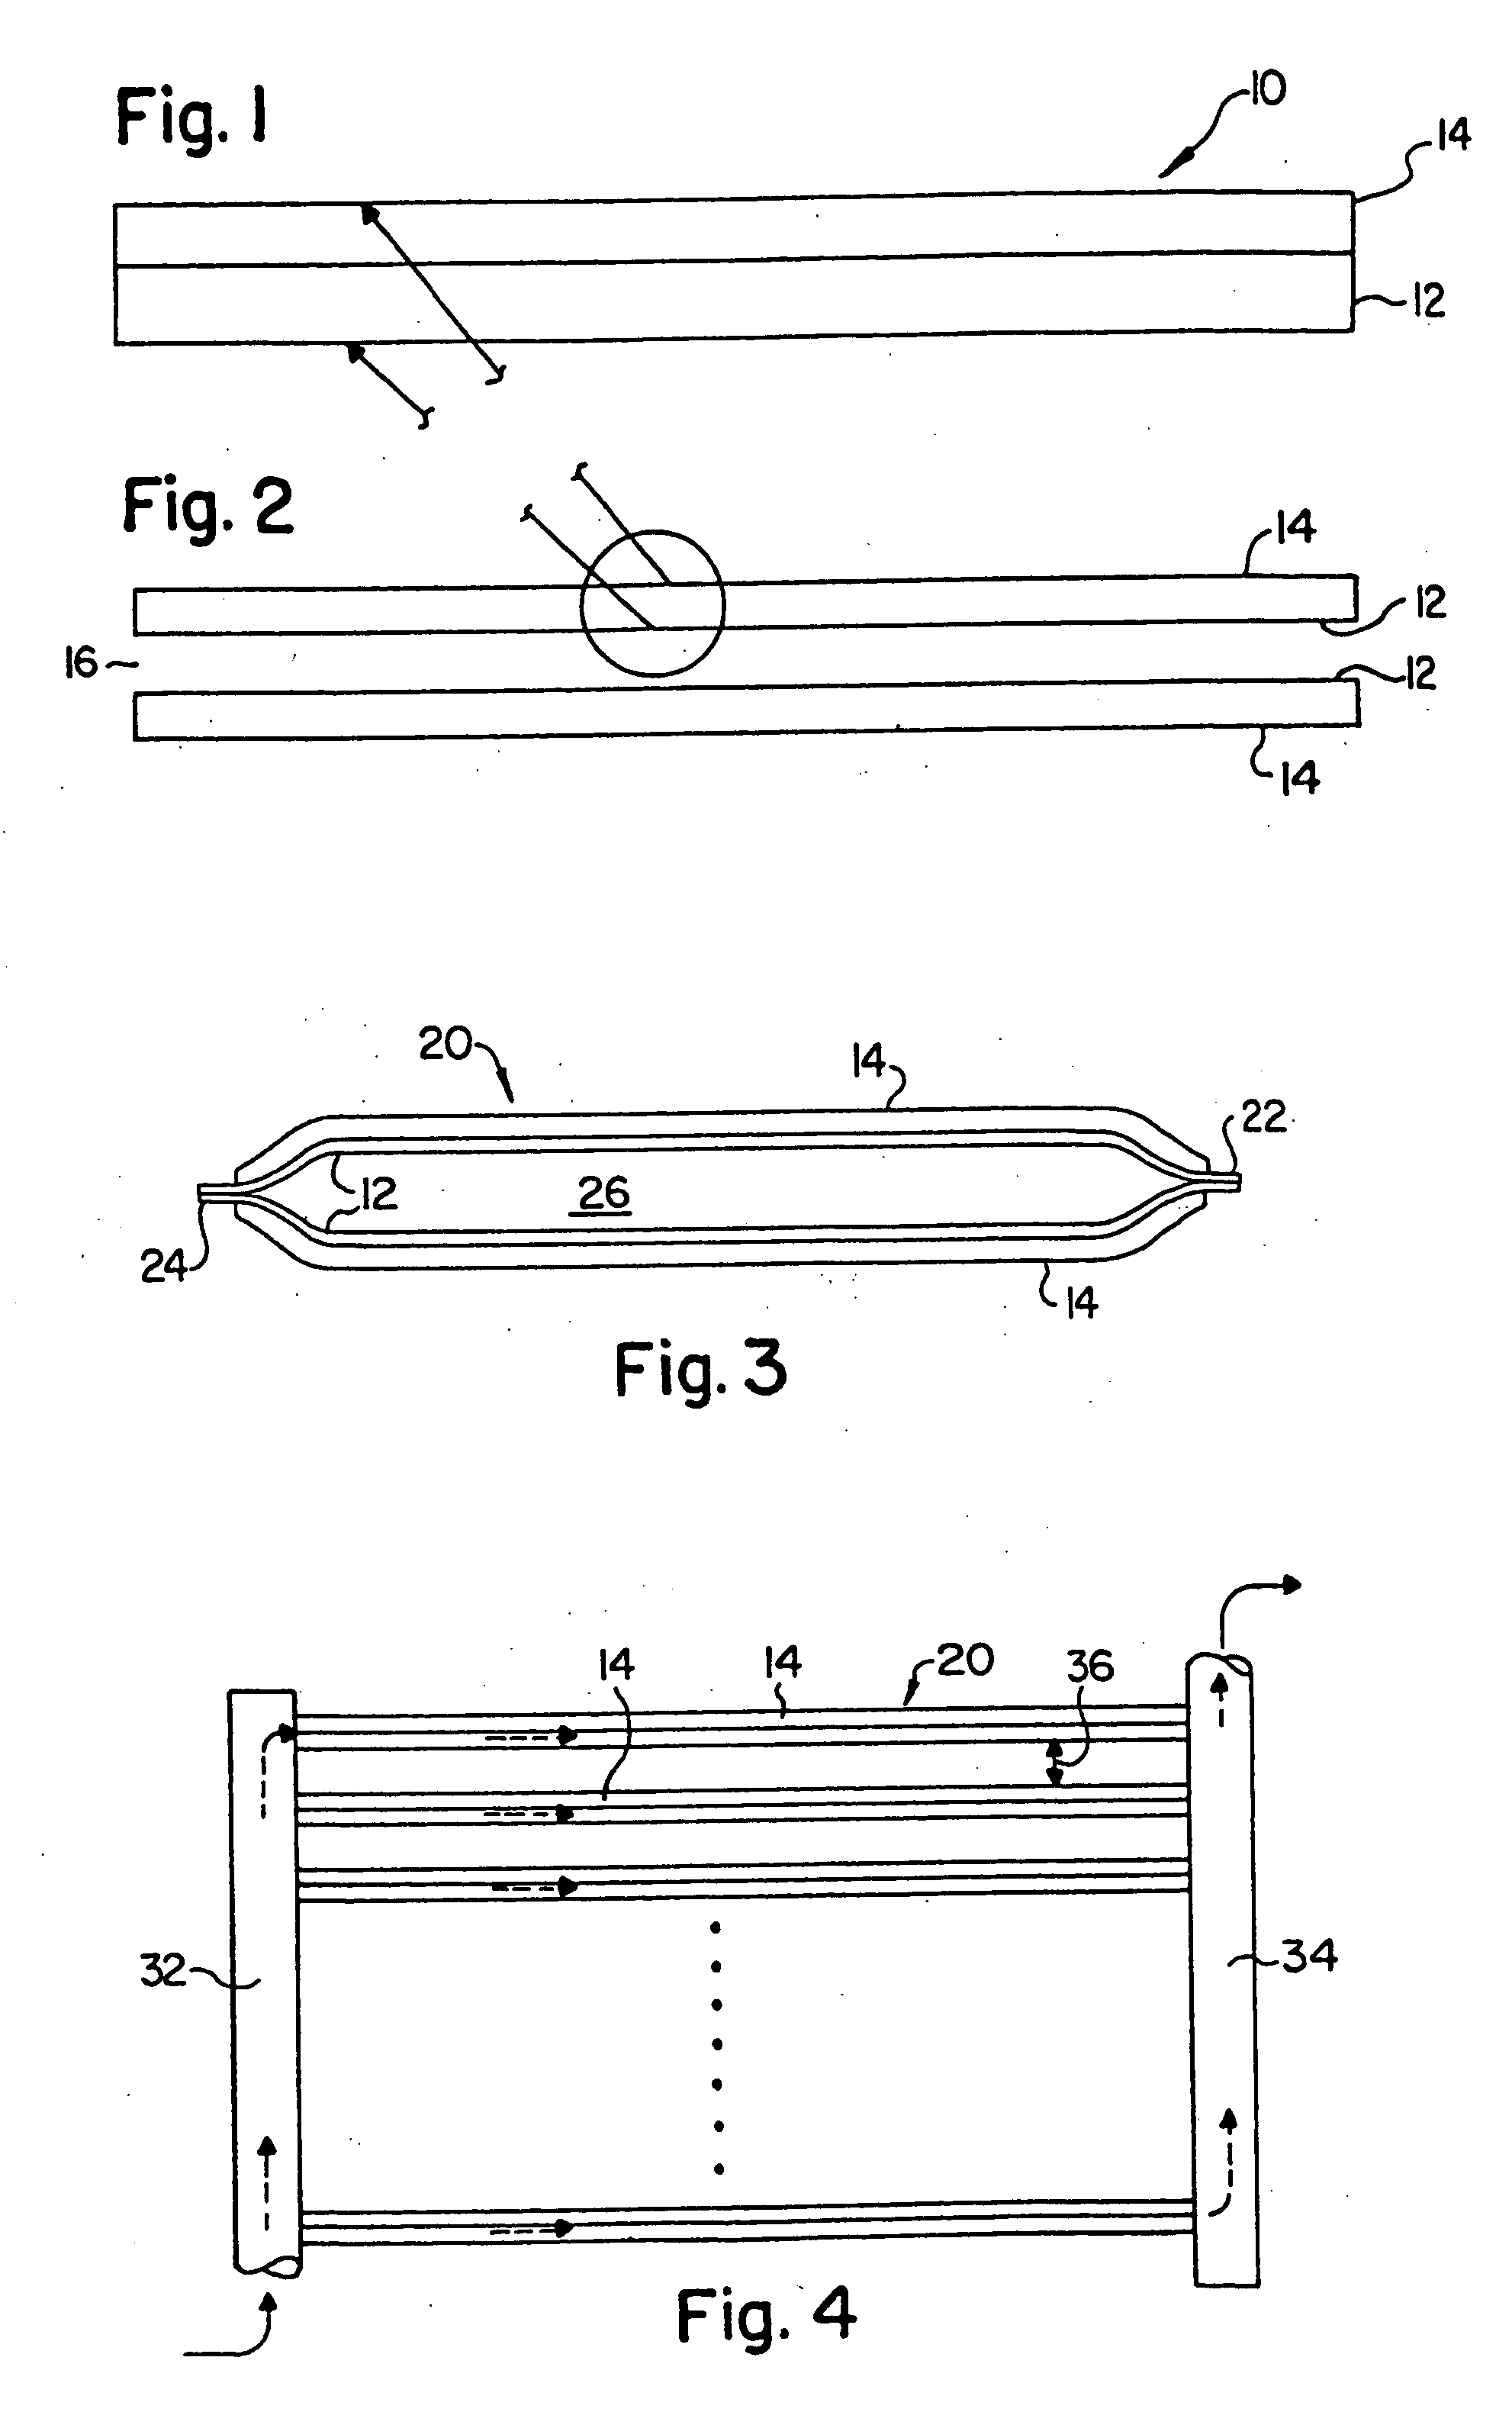 Adsorber generator for use in sorption heat pump processes